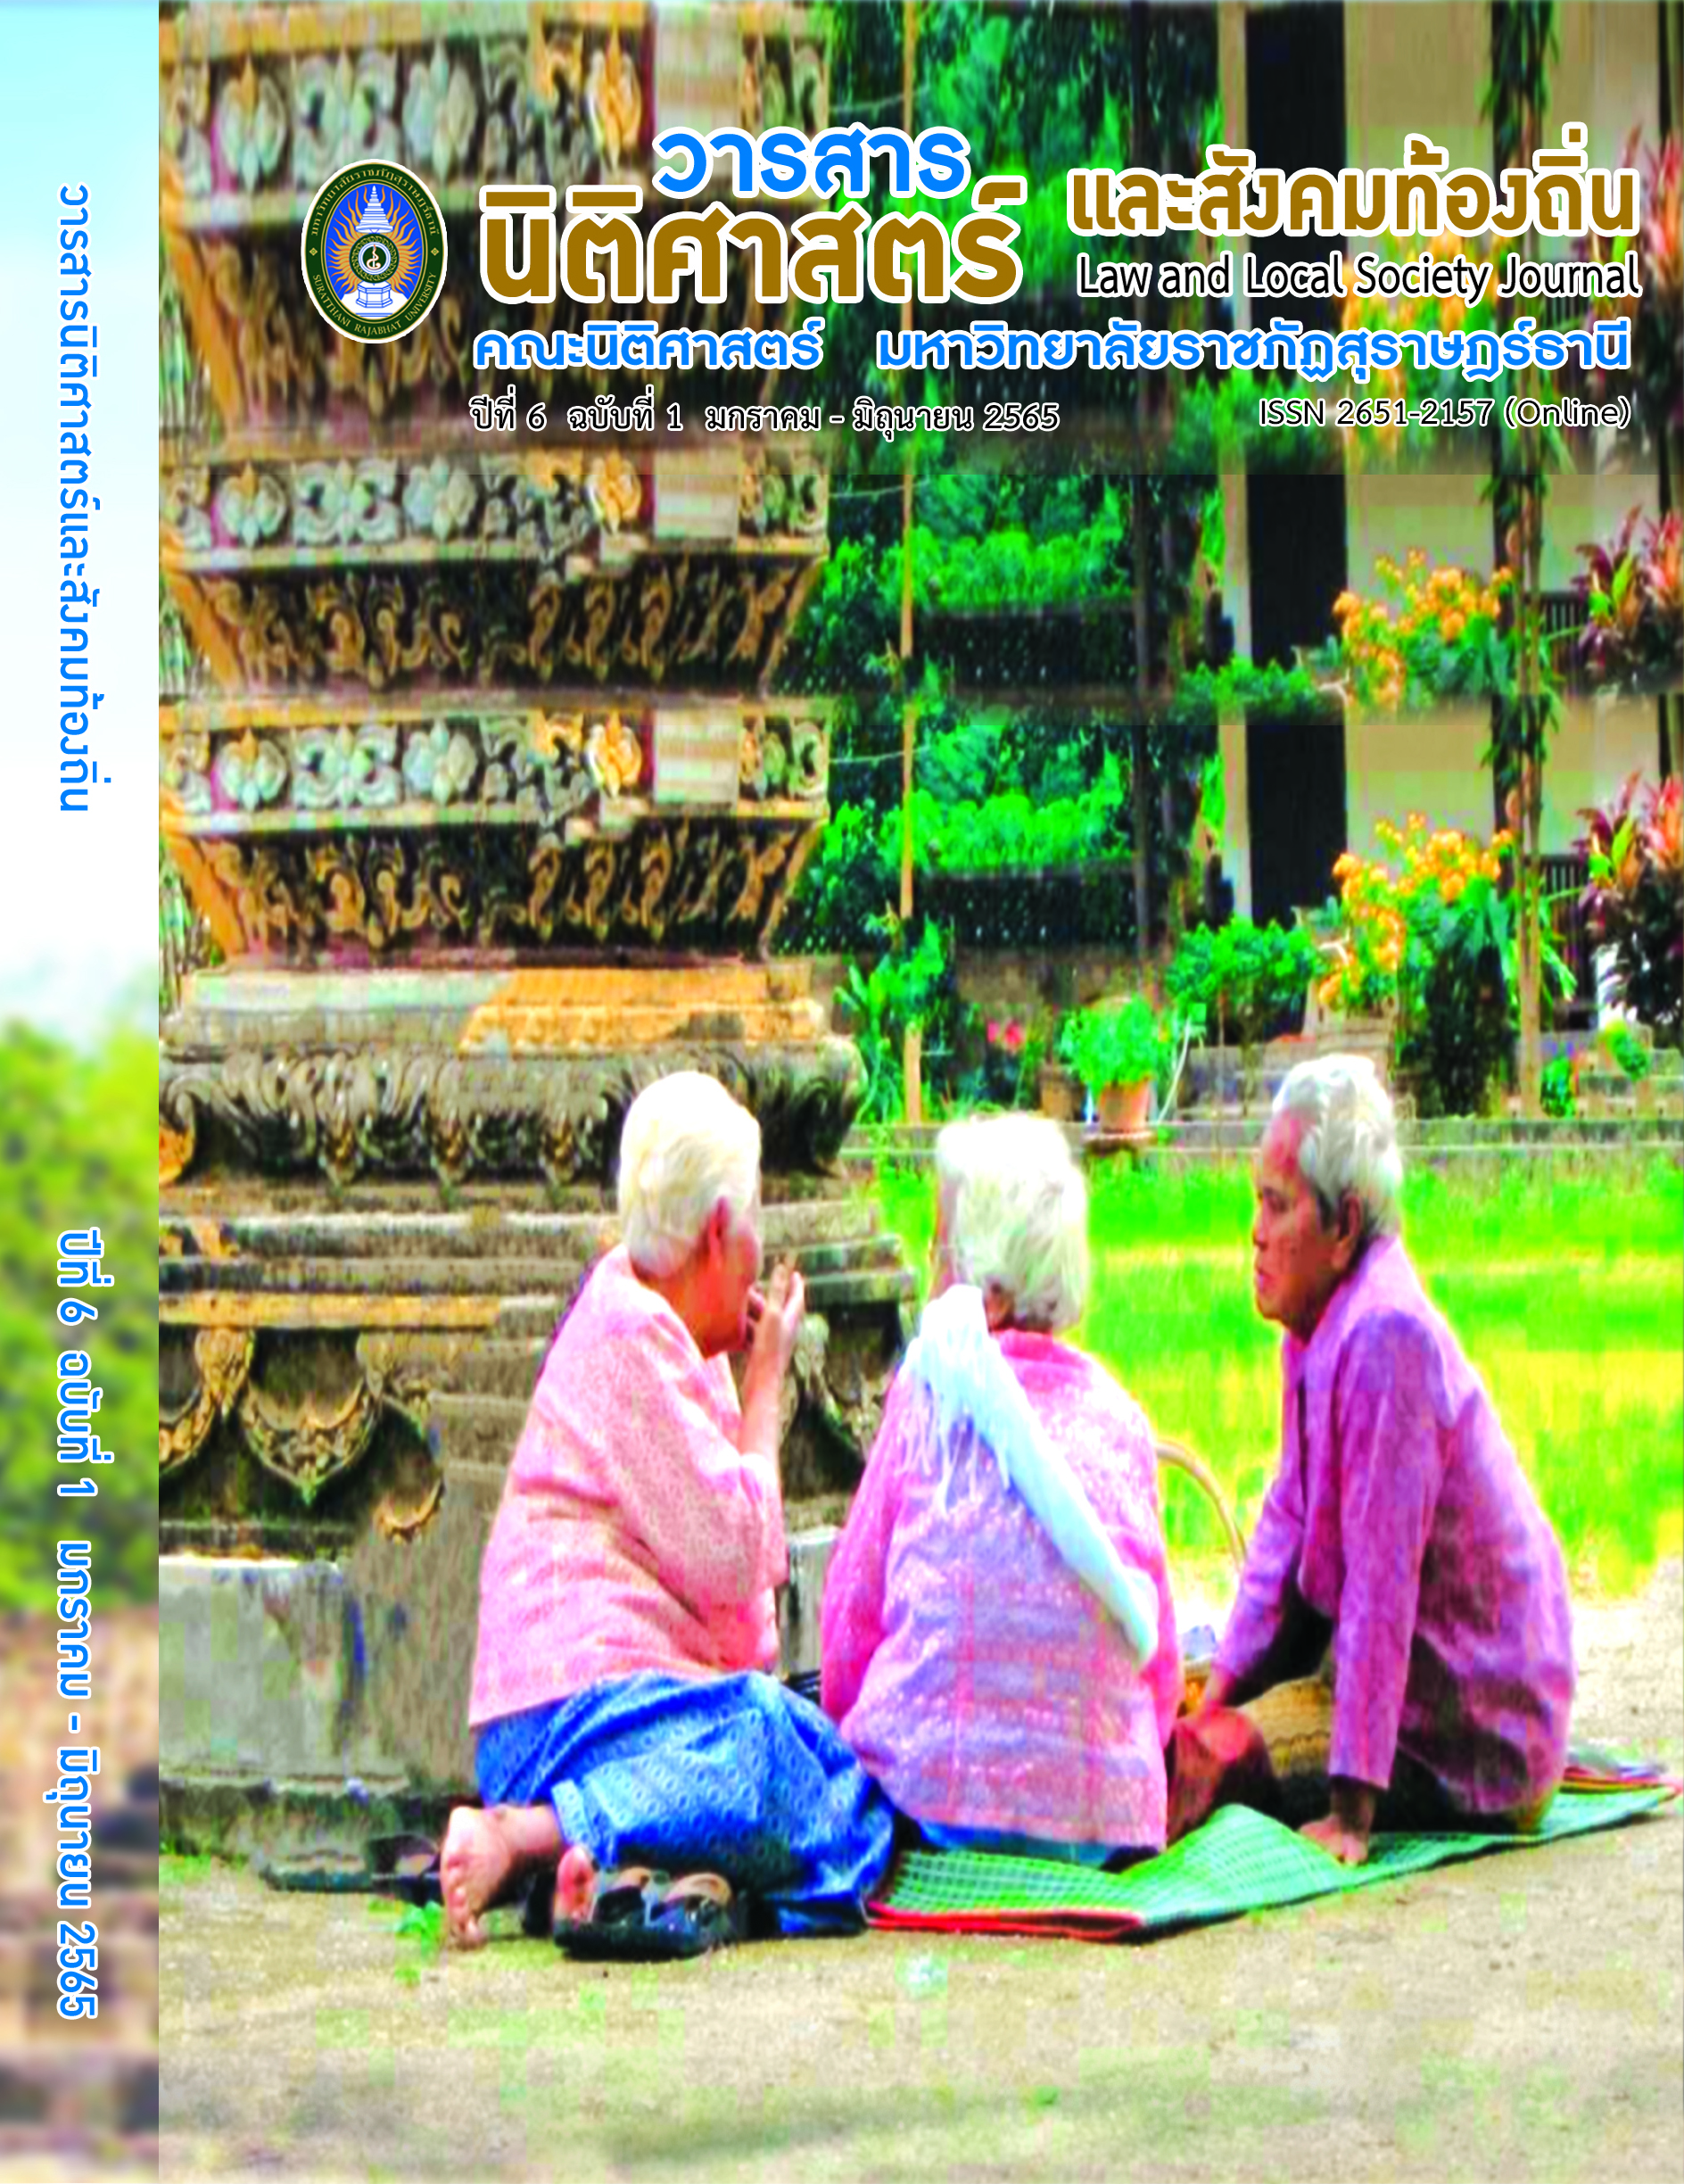 Cover of Journal of Law and Local Society